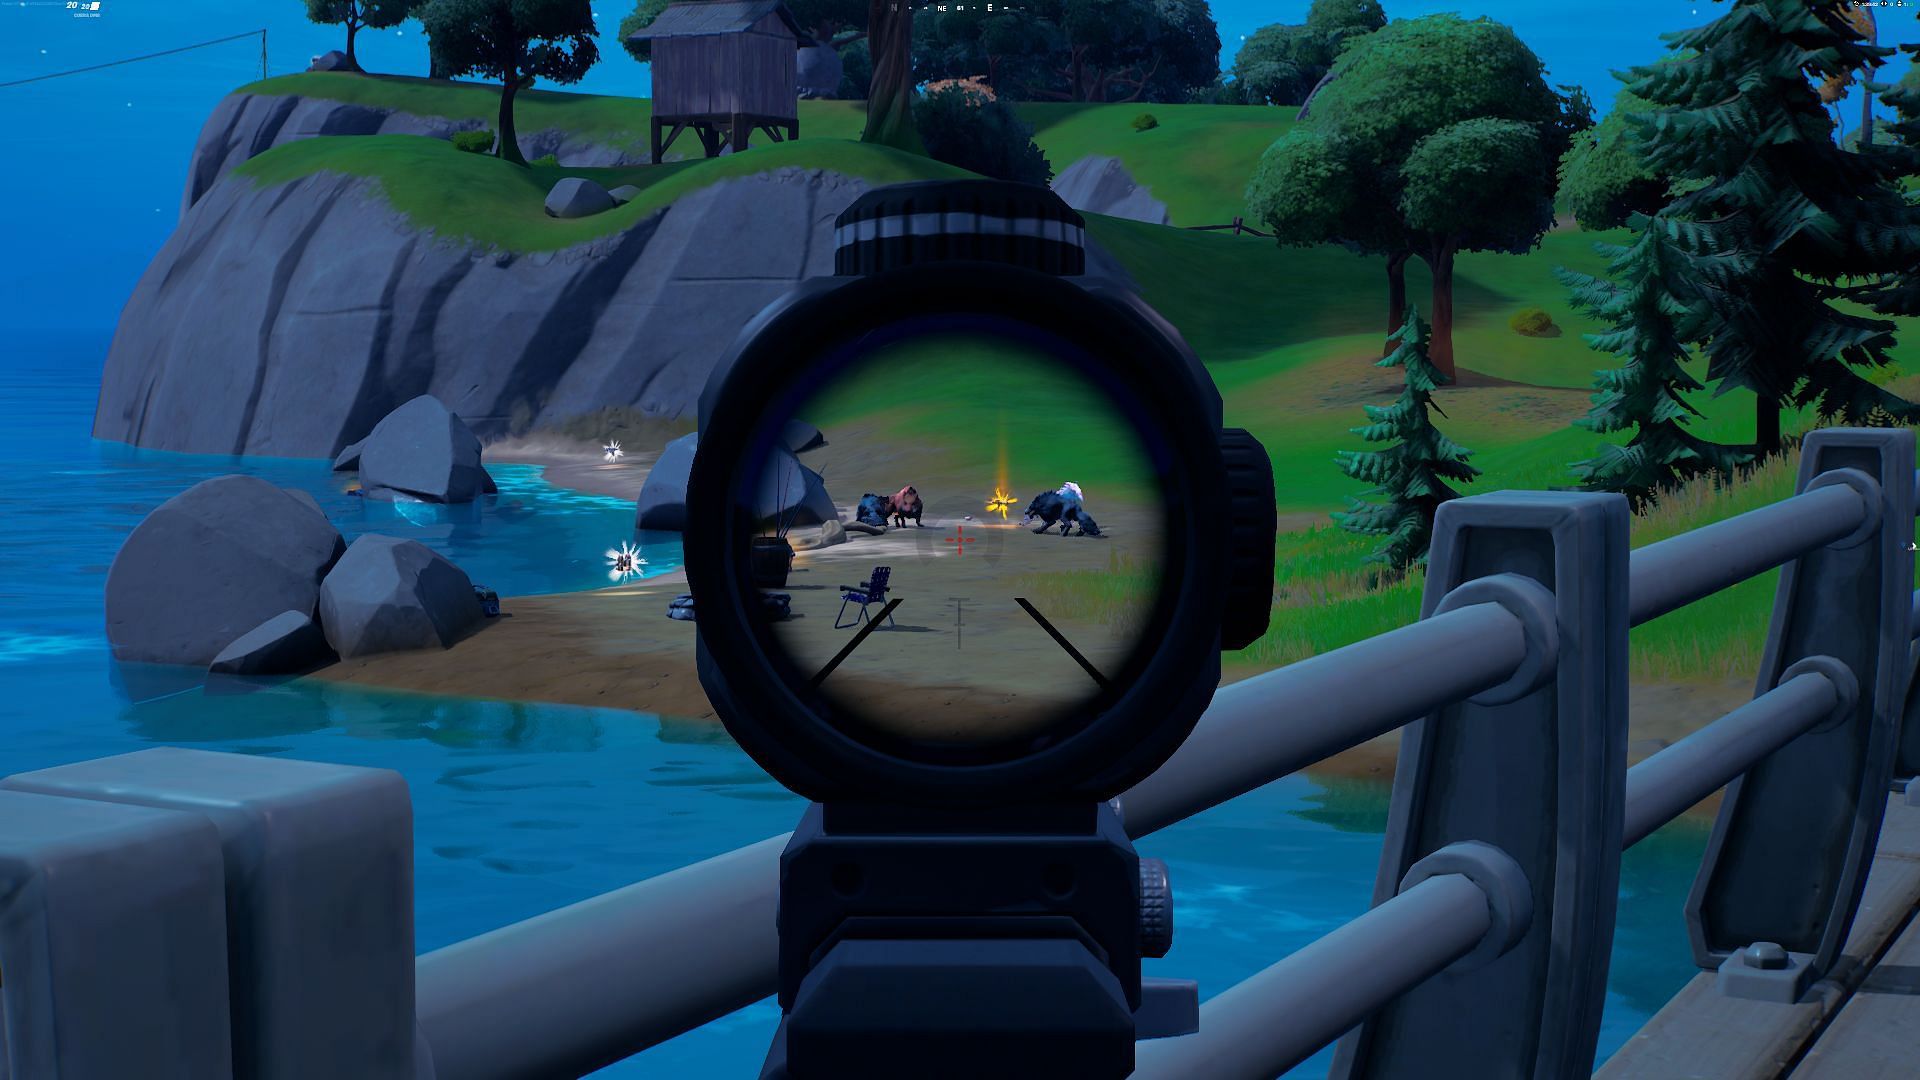 Glowing loot animals can appear at any moment (Image via Epic Games/Fortnite)